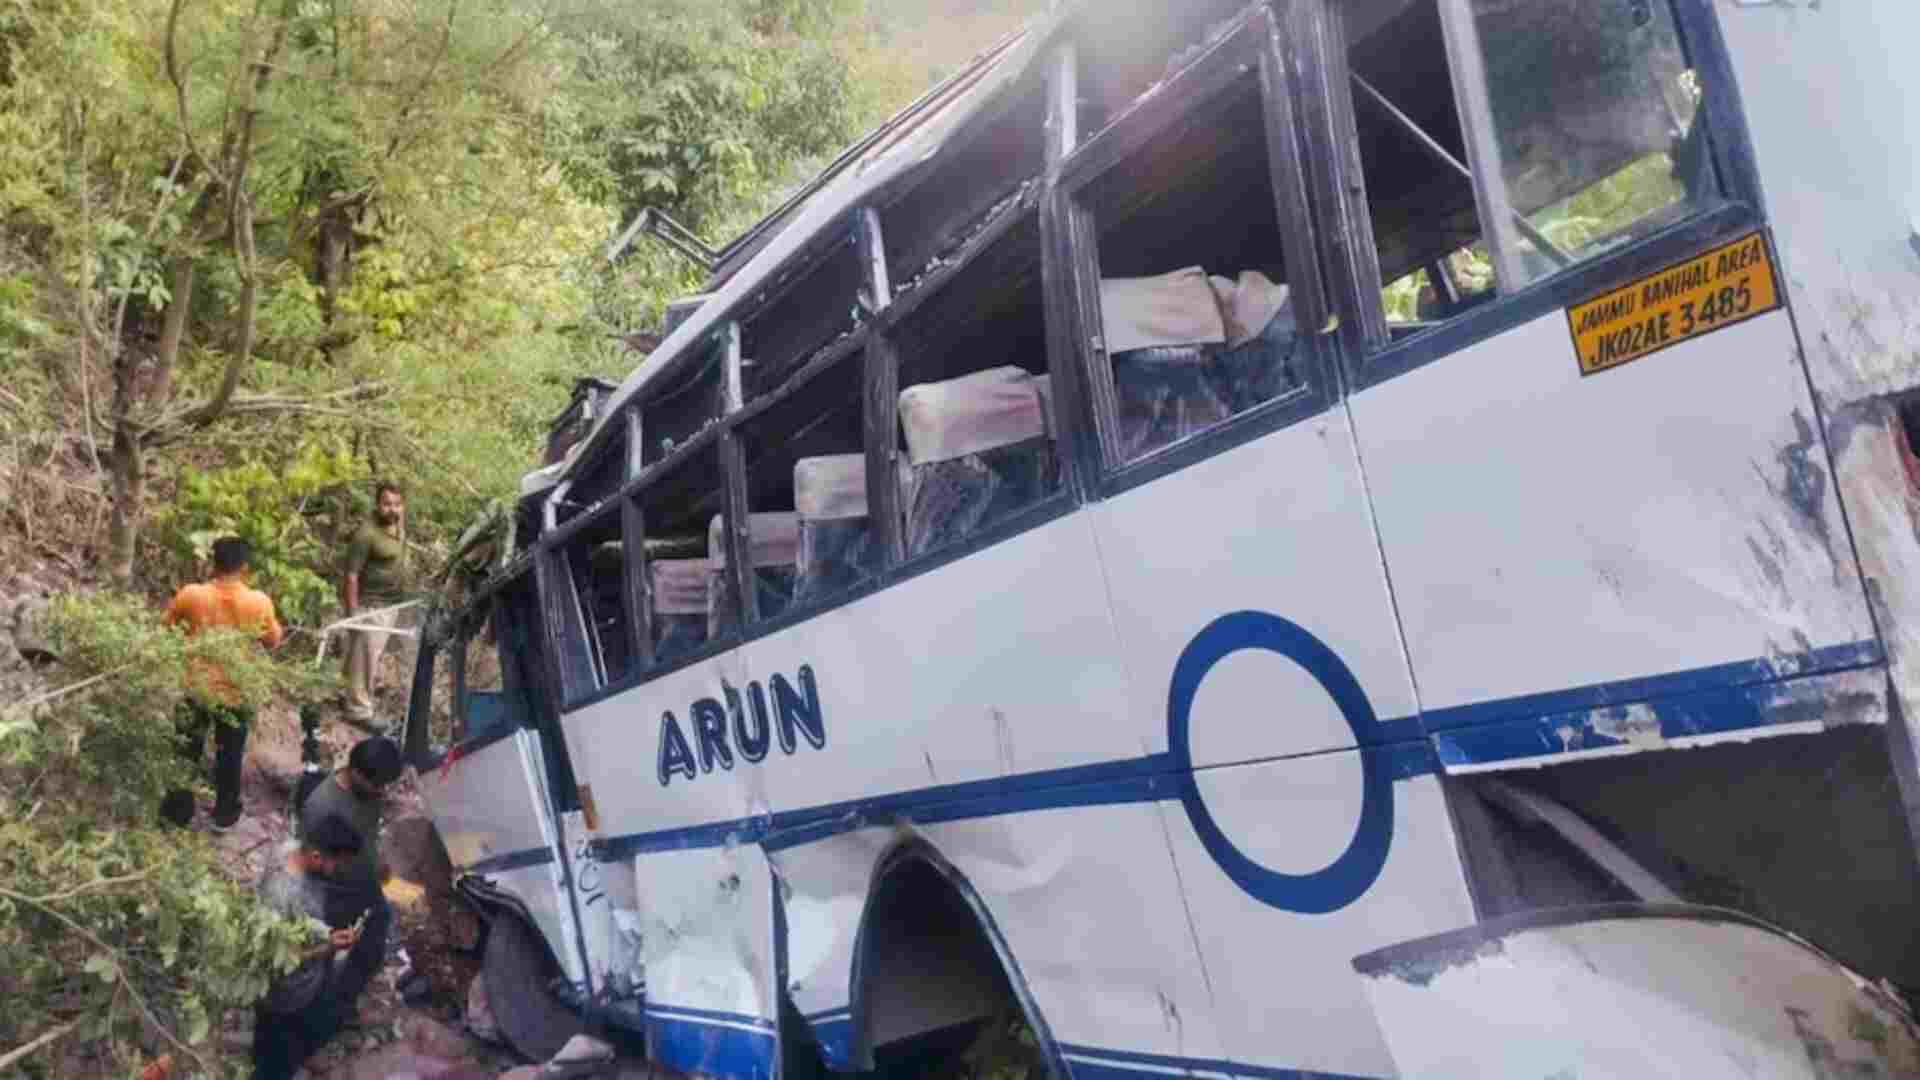 Reasi terror attack: The Incident occurred on Sunday when the pilgrims were on their way to a cave temple